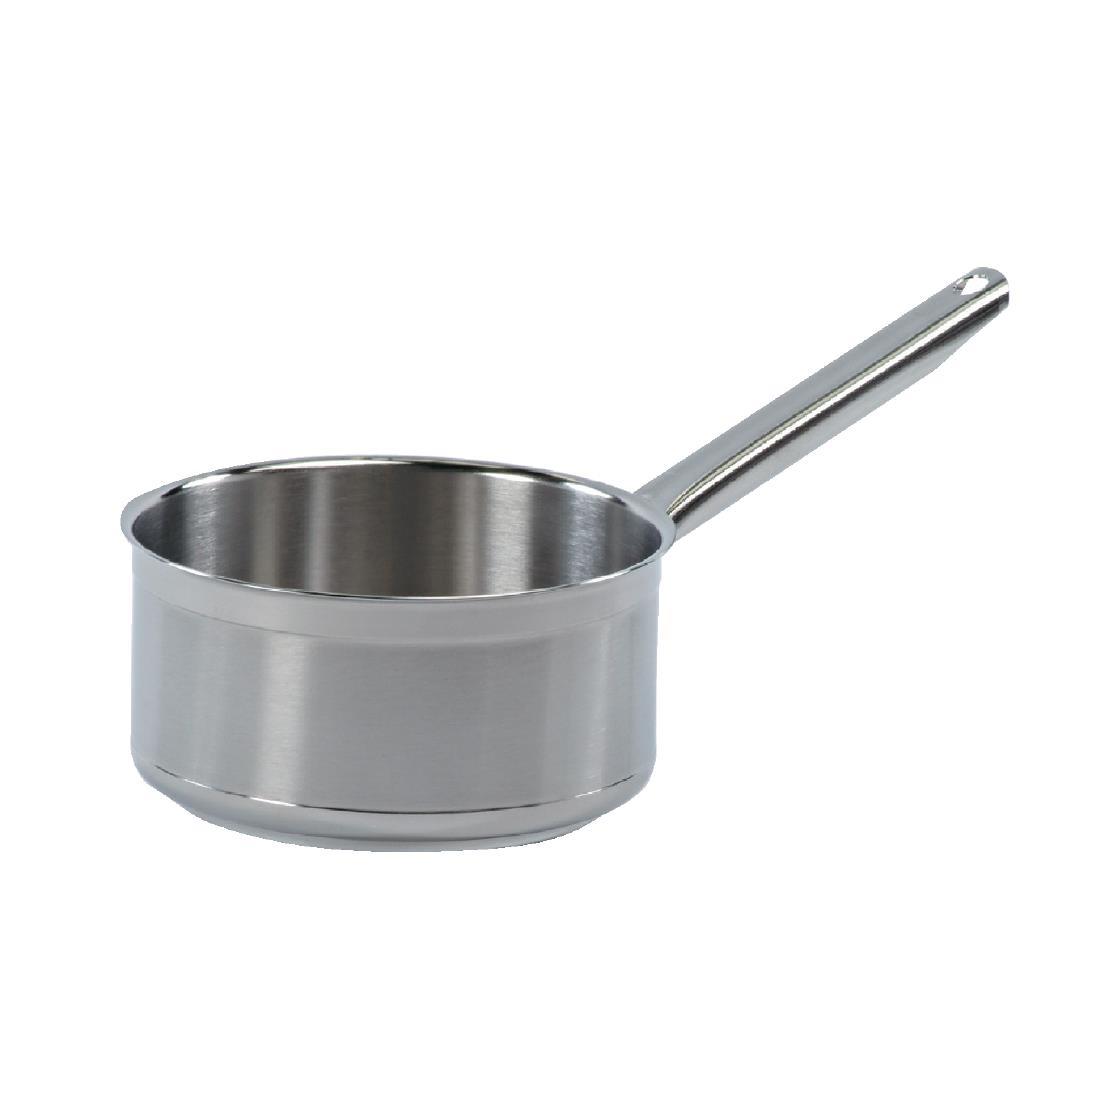 Matfer Bourgeat Tradition Plus Stainless Steel Saucepan 1.2Ltr - L230  - 1